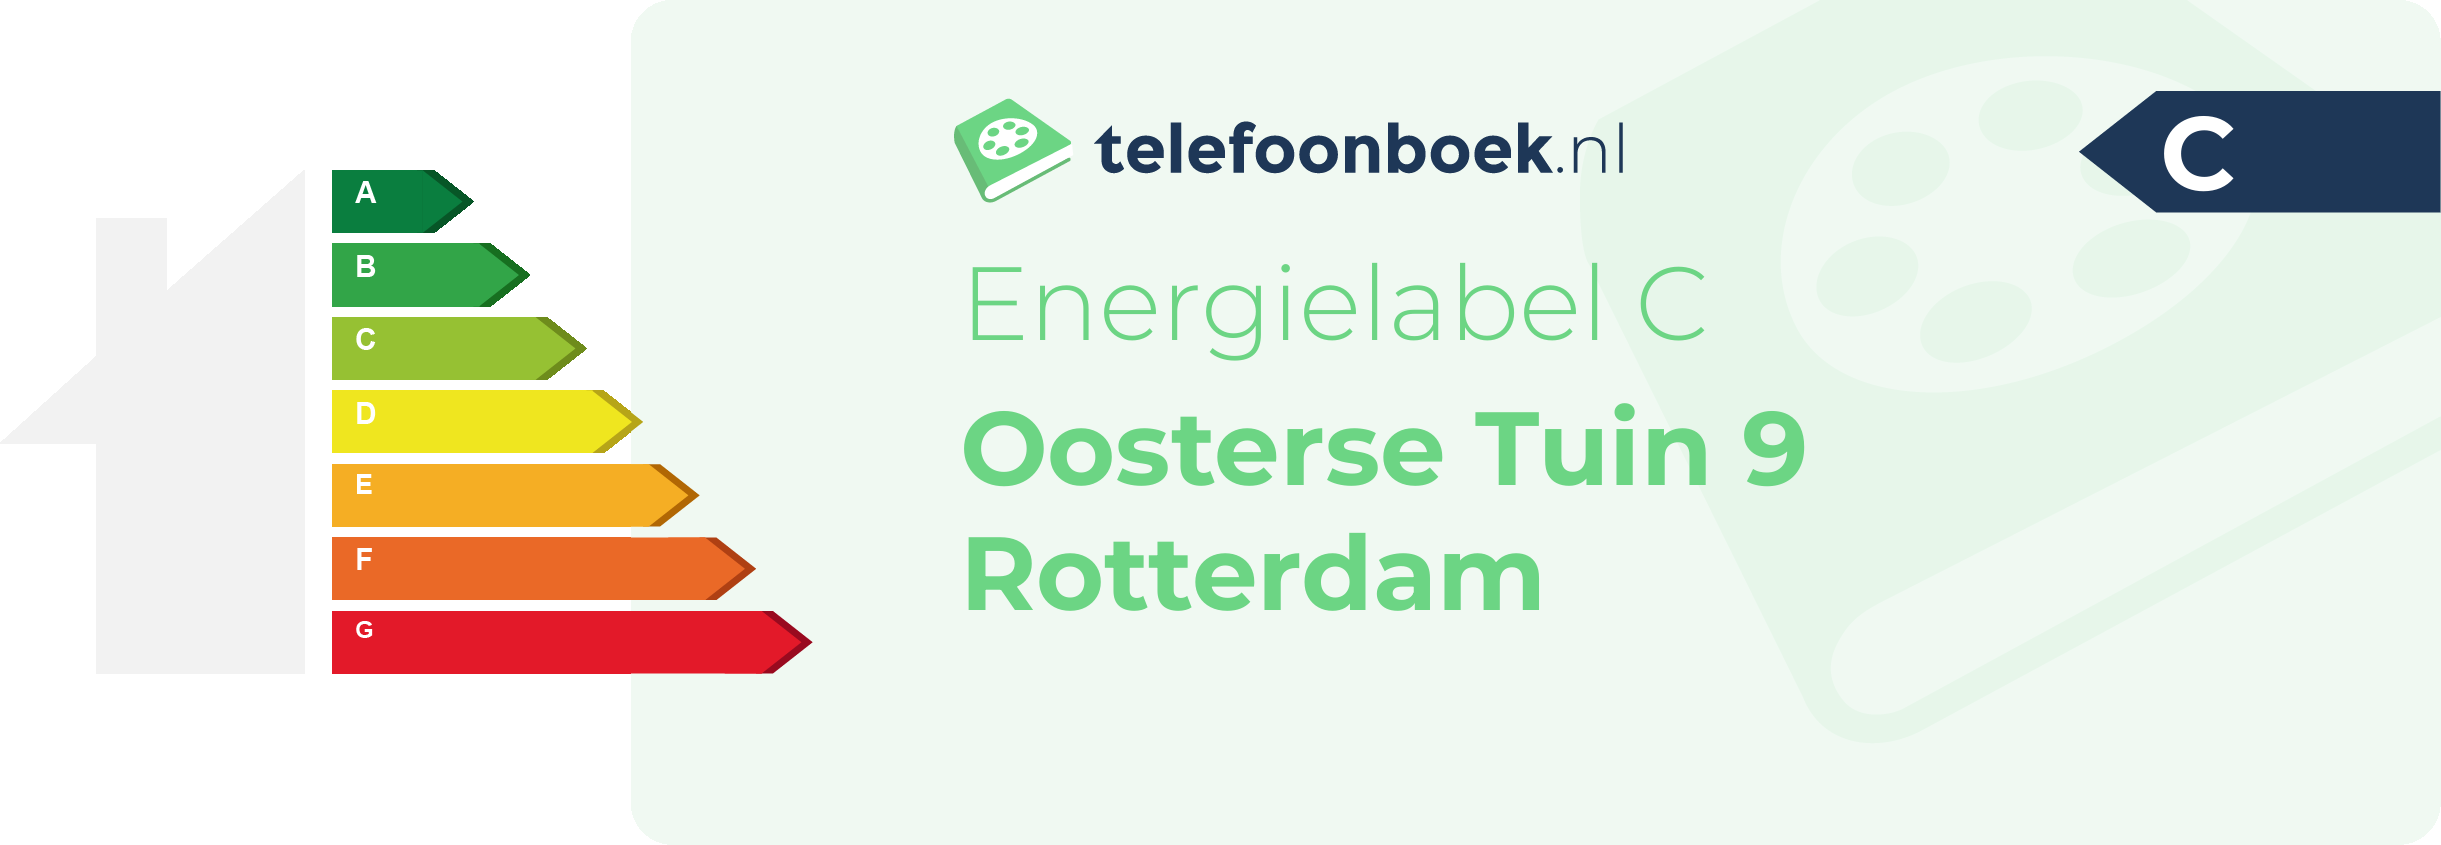 Energielabel Oosterse Tuin 9 Rotterdam